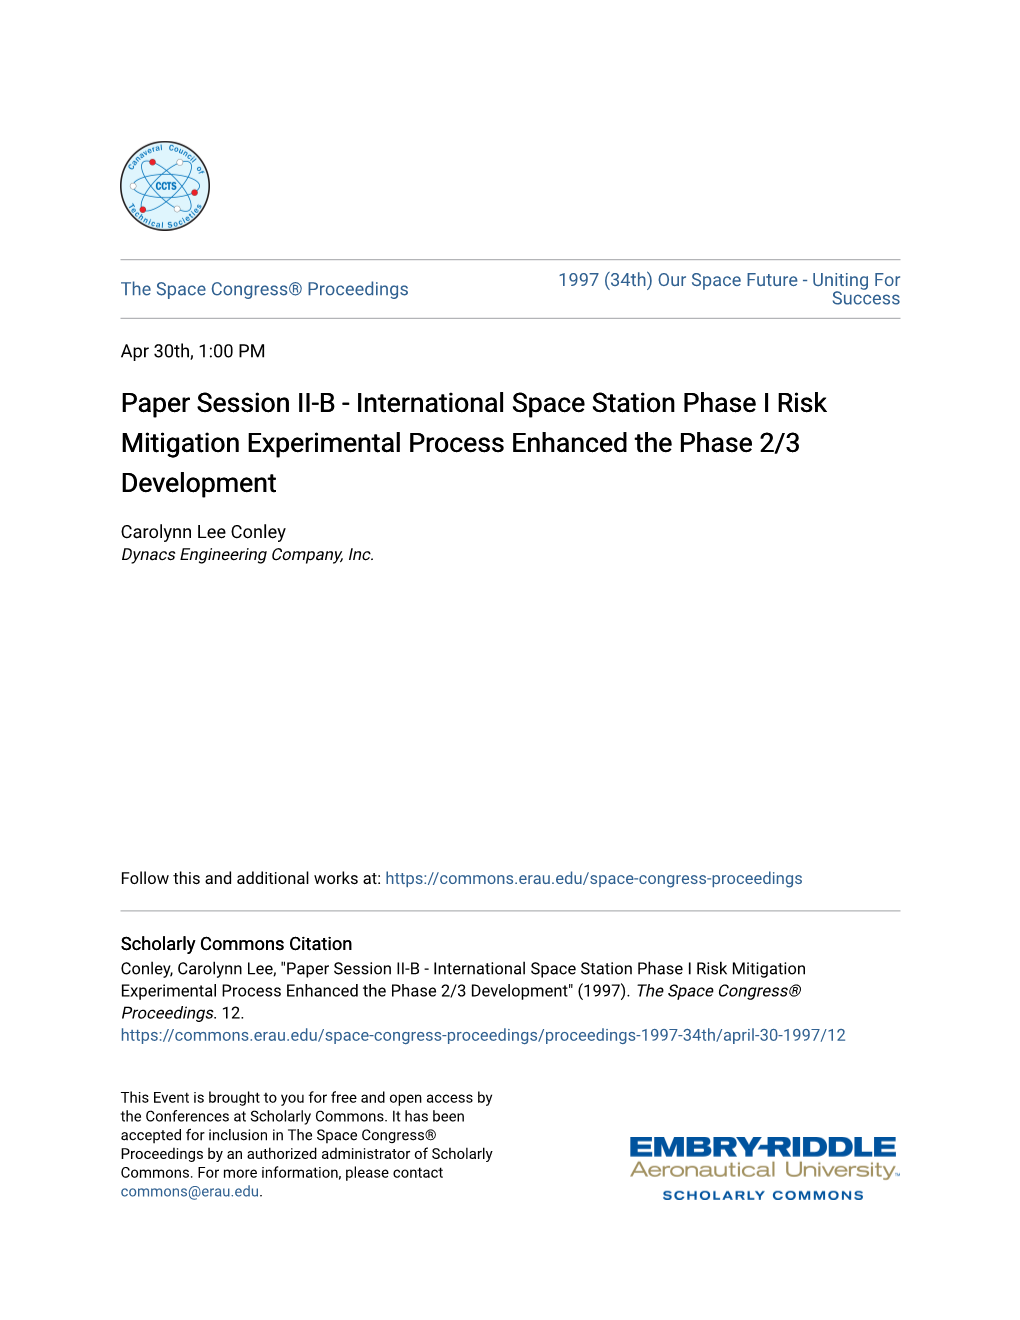 Paper Session II-B - International Space Station Phase I Risk Mitigation Experimental Process Enhanced the Phase 2/3 Development